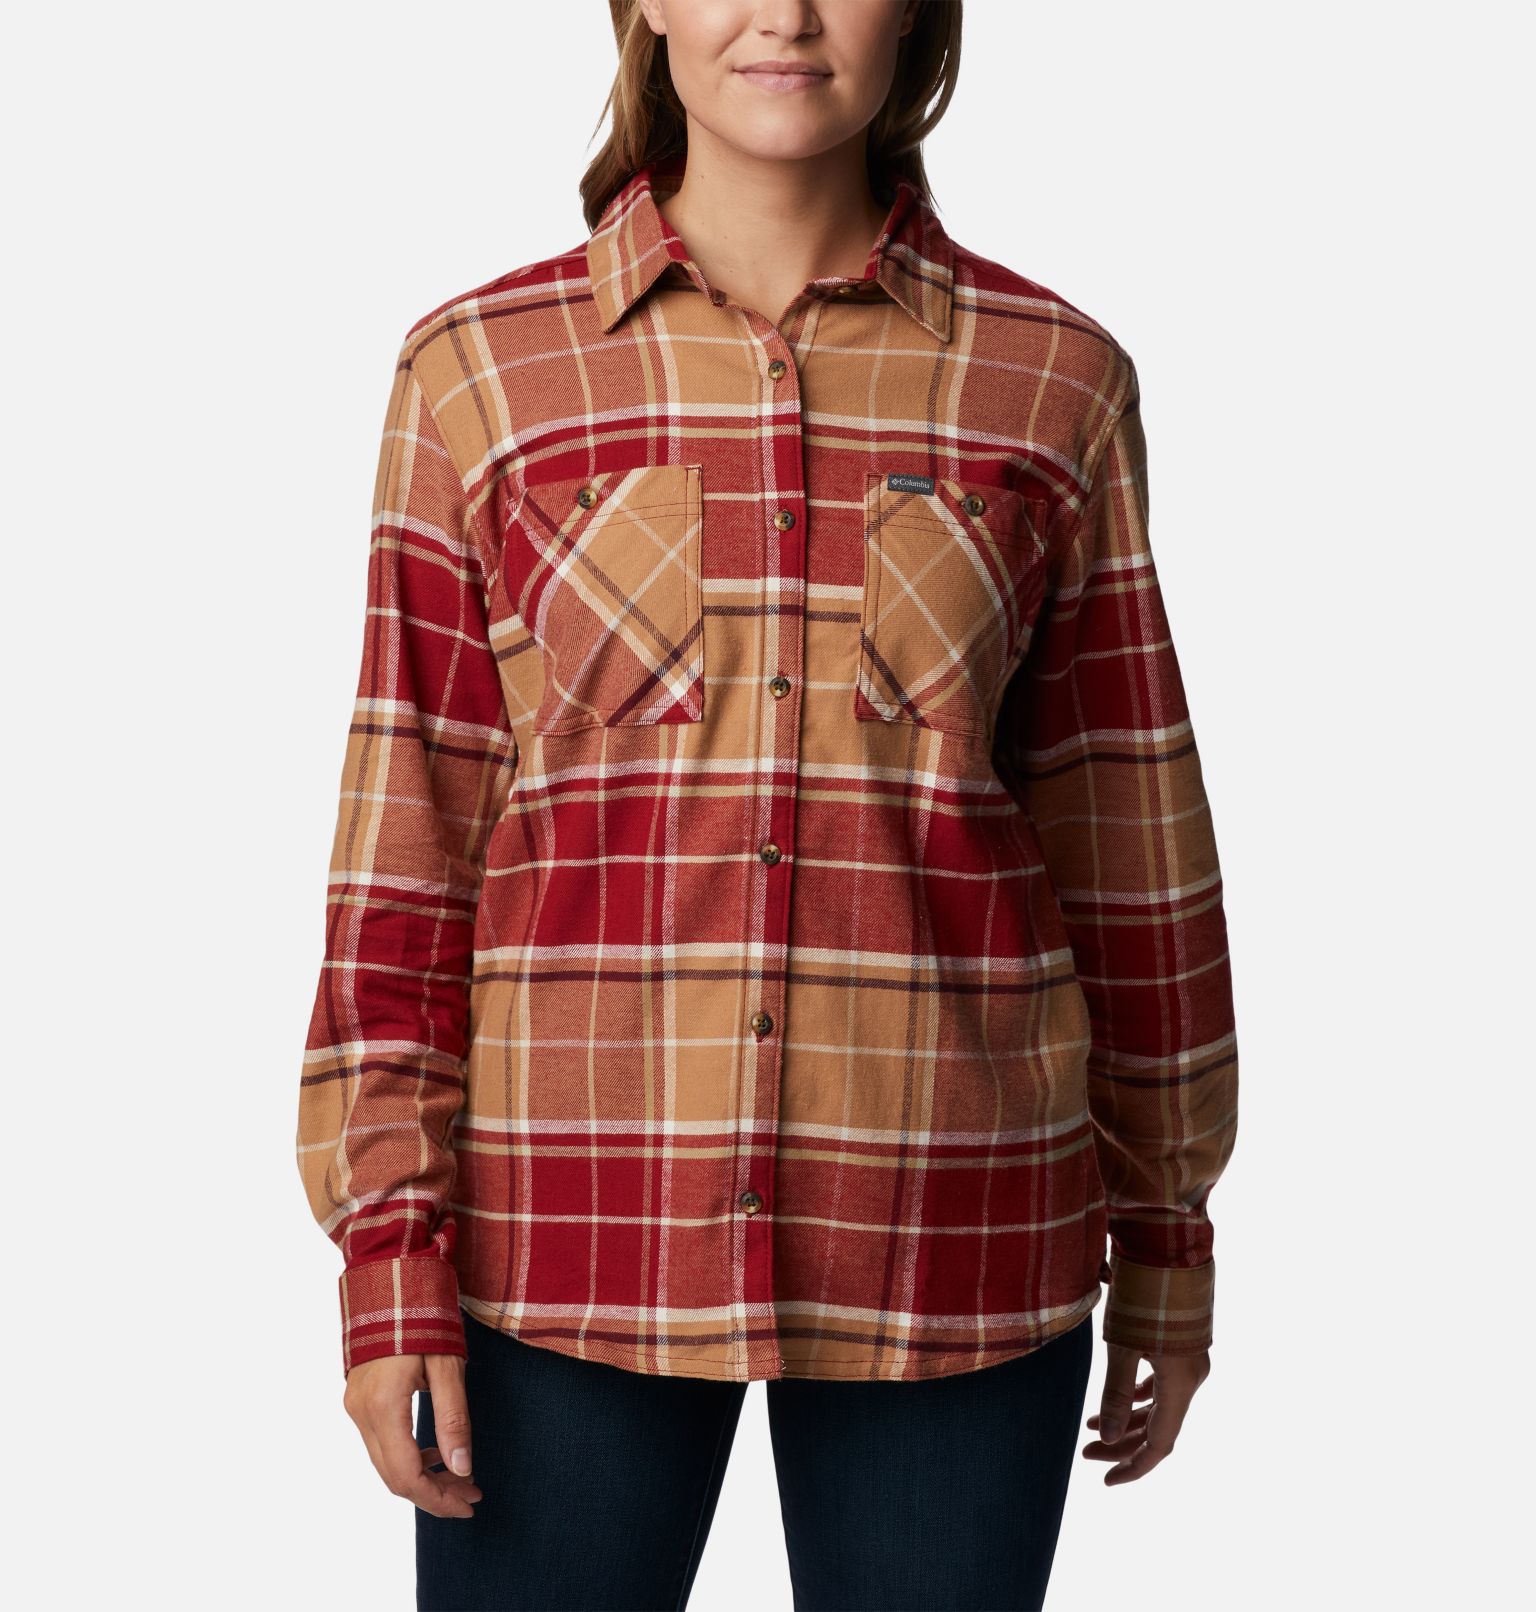 Columbia Women's Clay Hills Stretch Flannel Shirt (2 Colors) $14.38 + Free Shipping